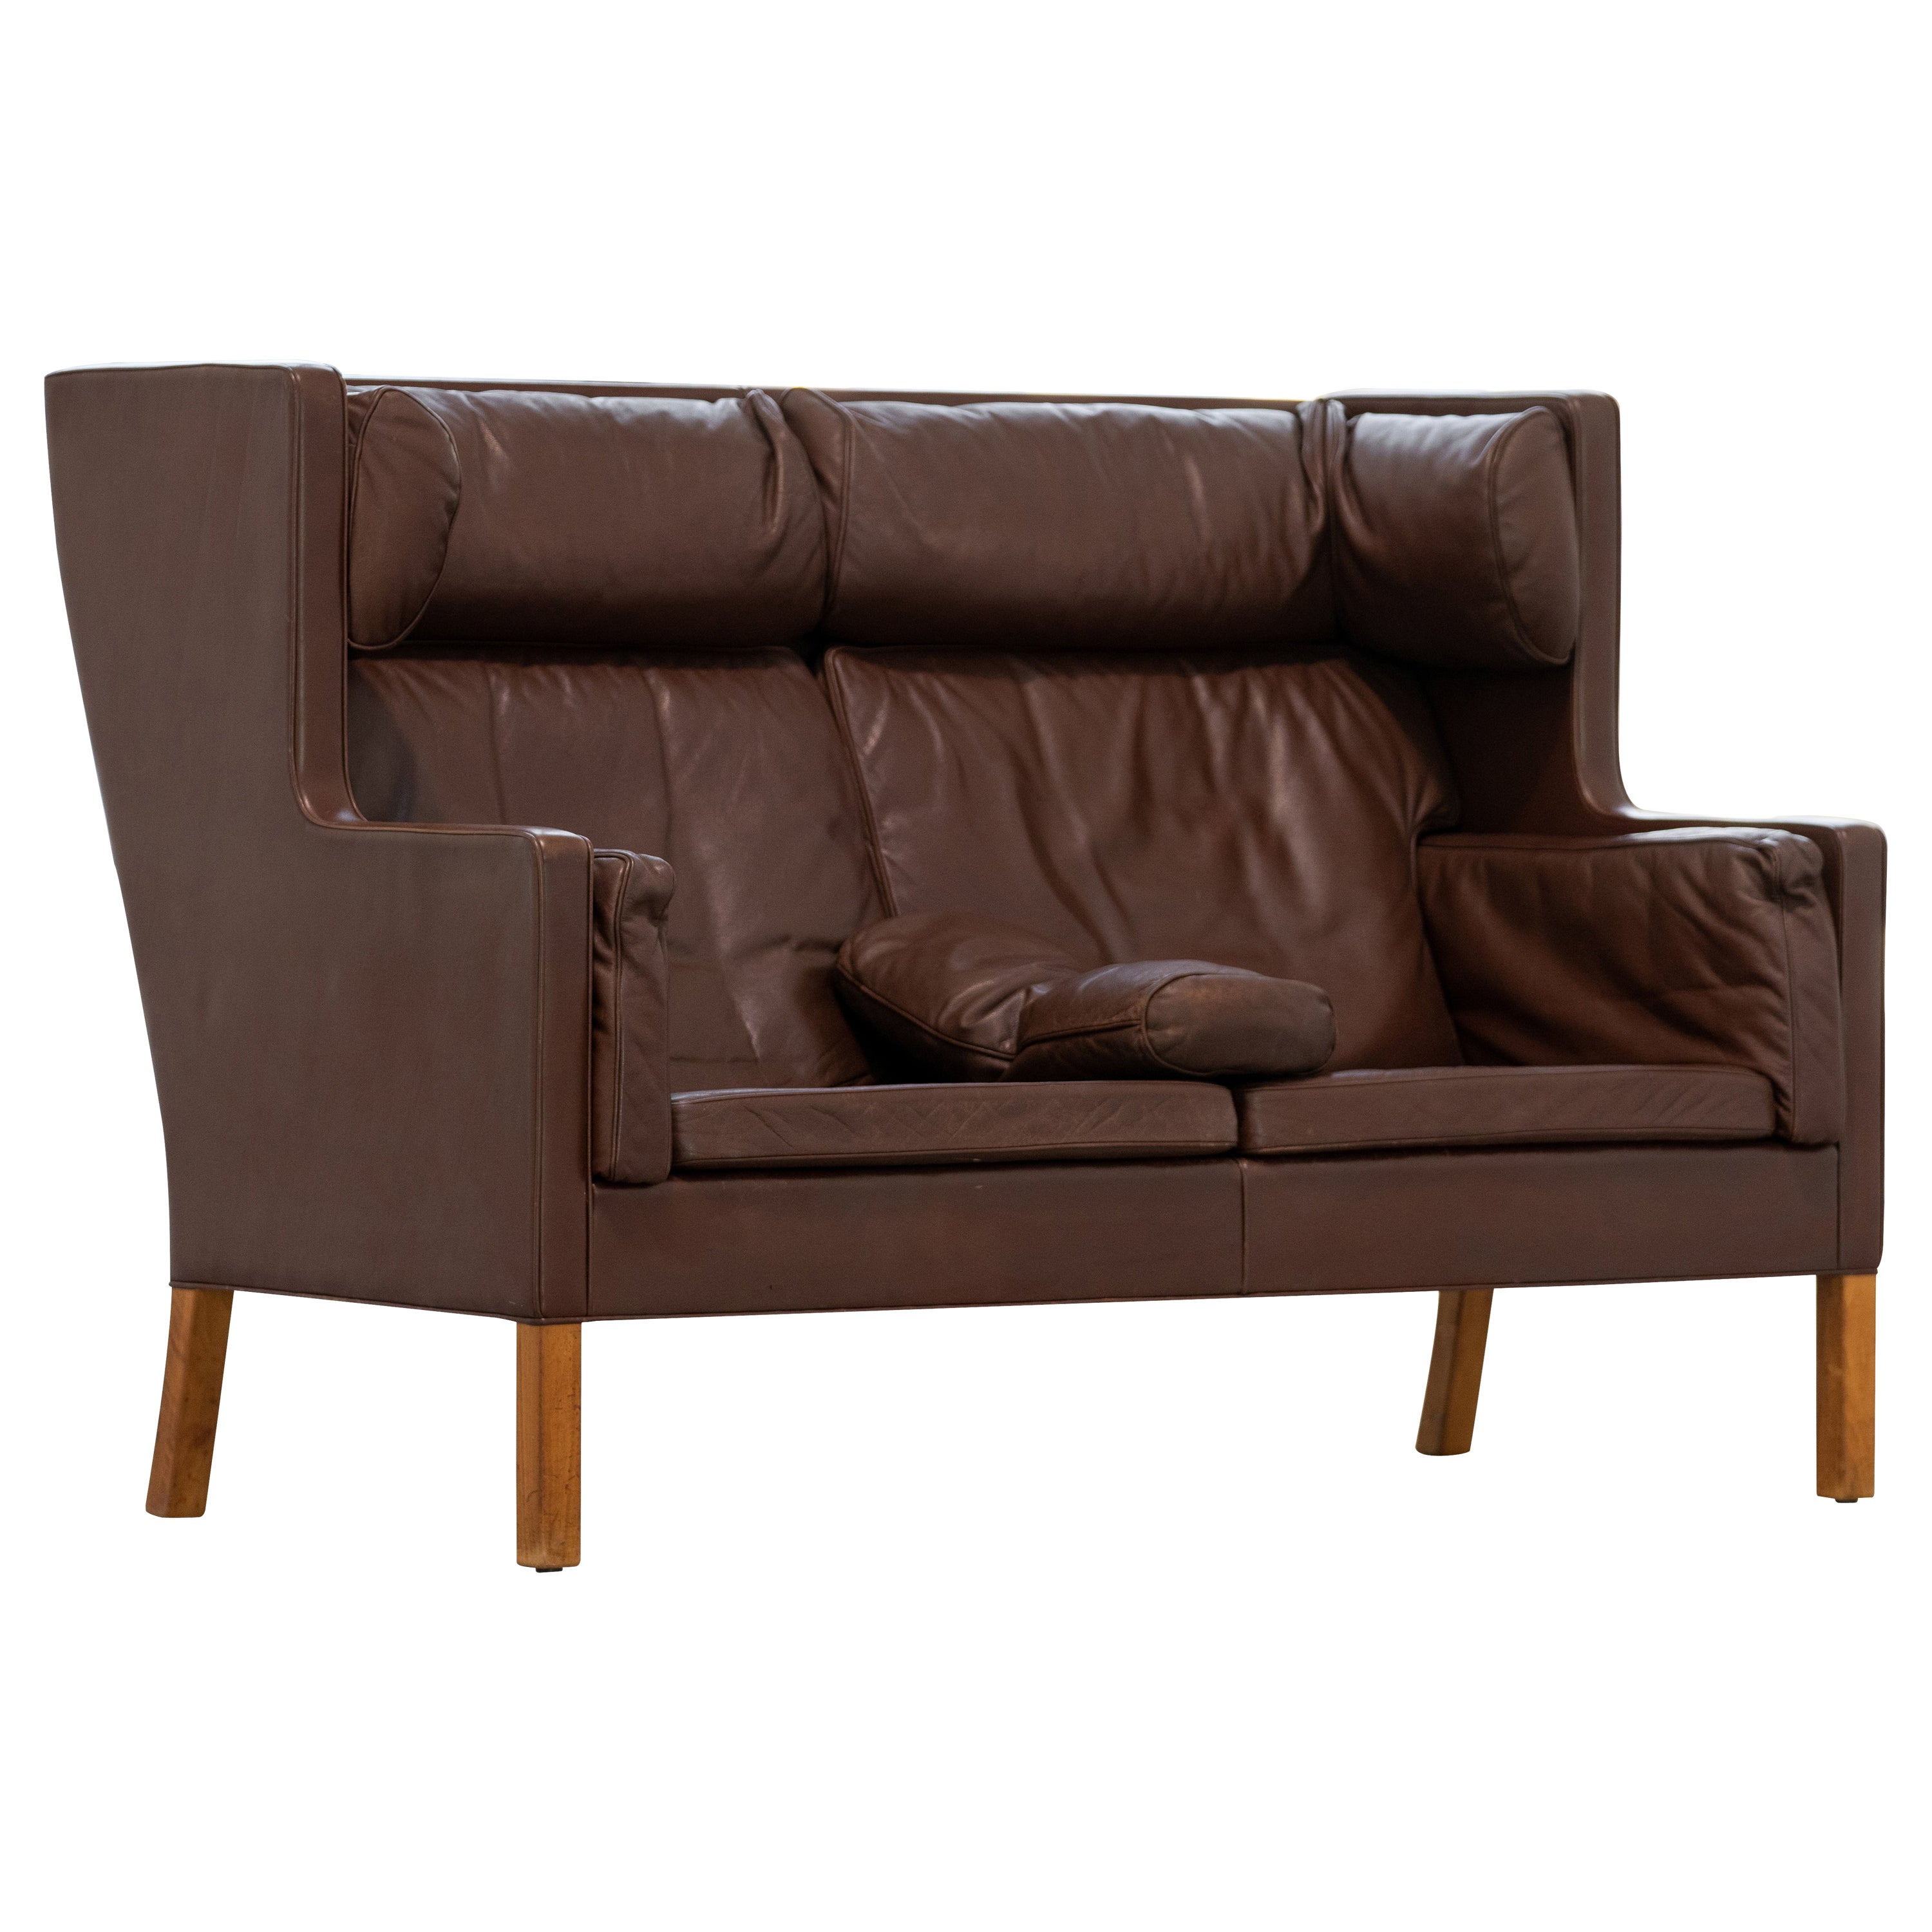 Børge Mogensen, Coupé Sofa in Chocolate Leather, 1971 for Fredericia, Denmark